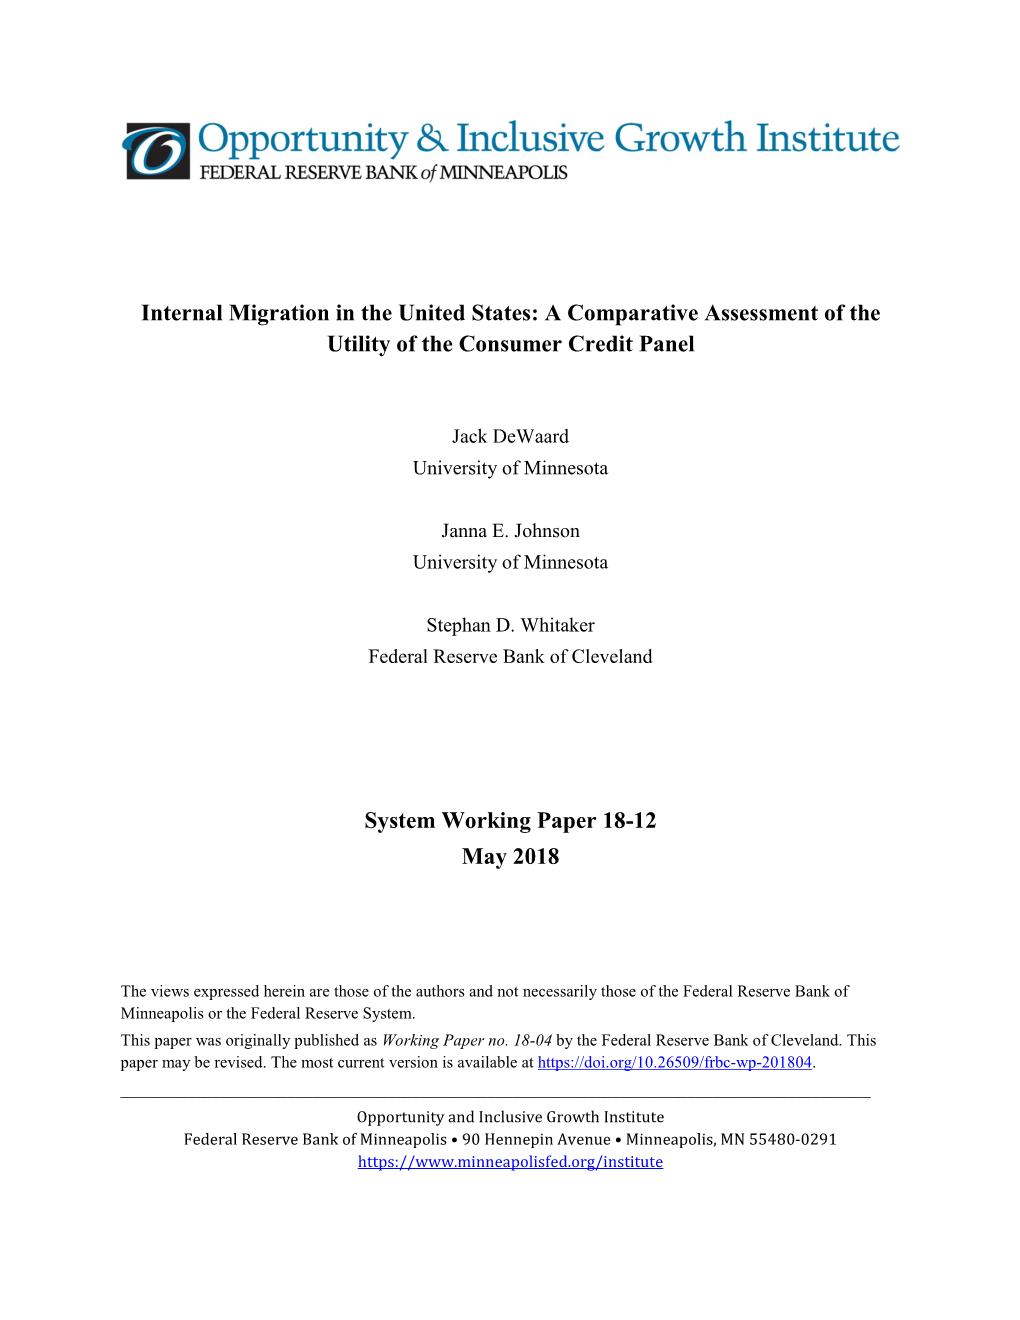 Internal Migration in the United States: a Comparative Assessment of the Utility of the Consumer Credit Panel